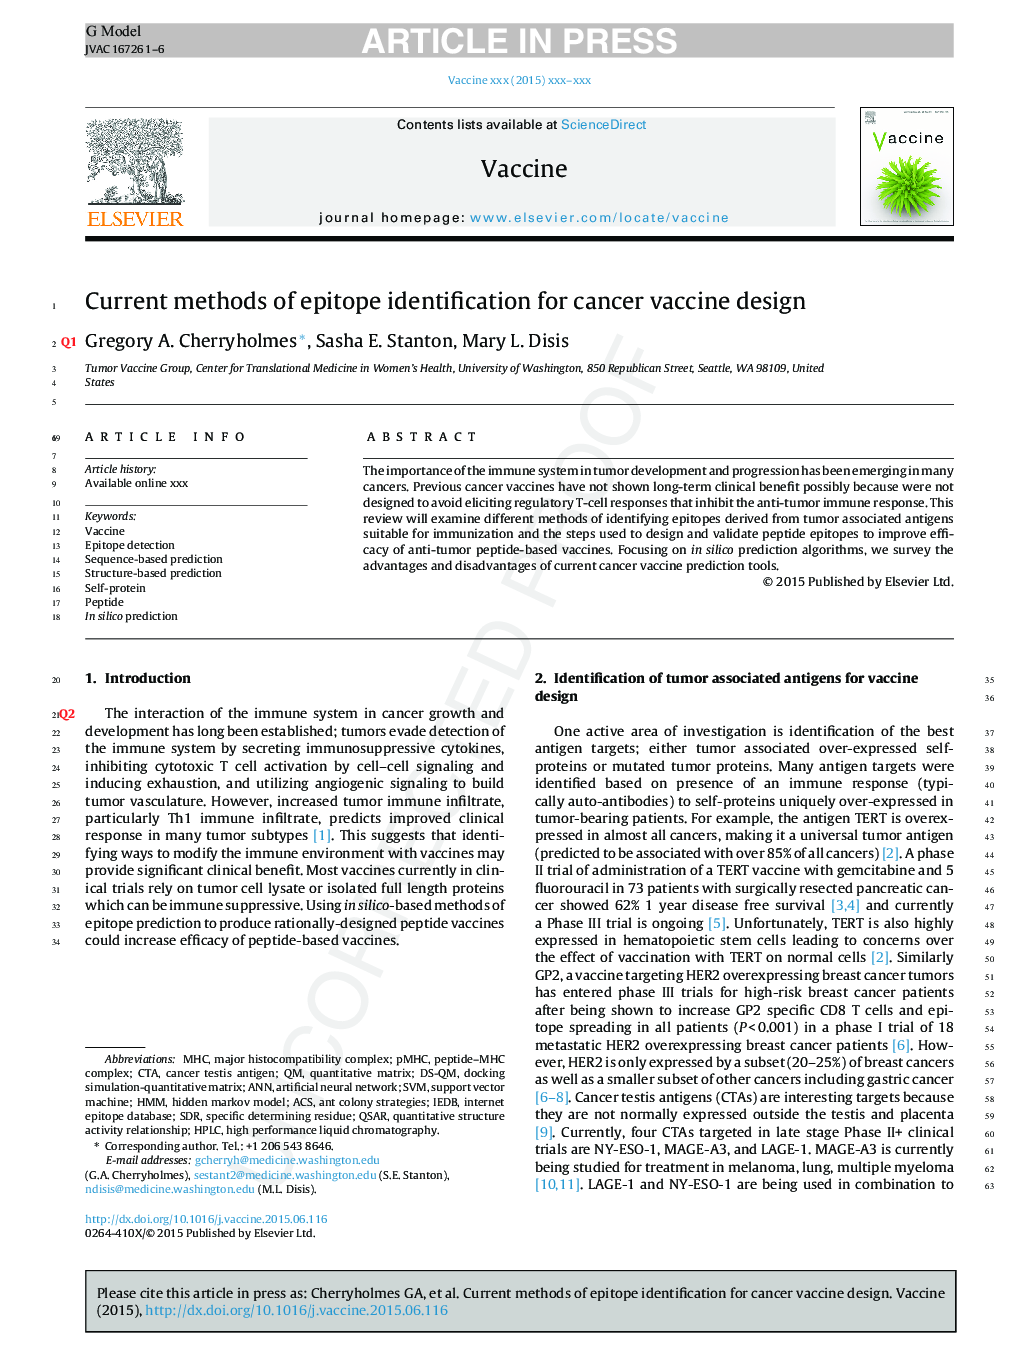 Current methods of epitope identification for cancer vaccine design